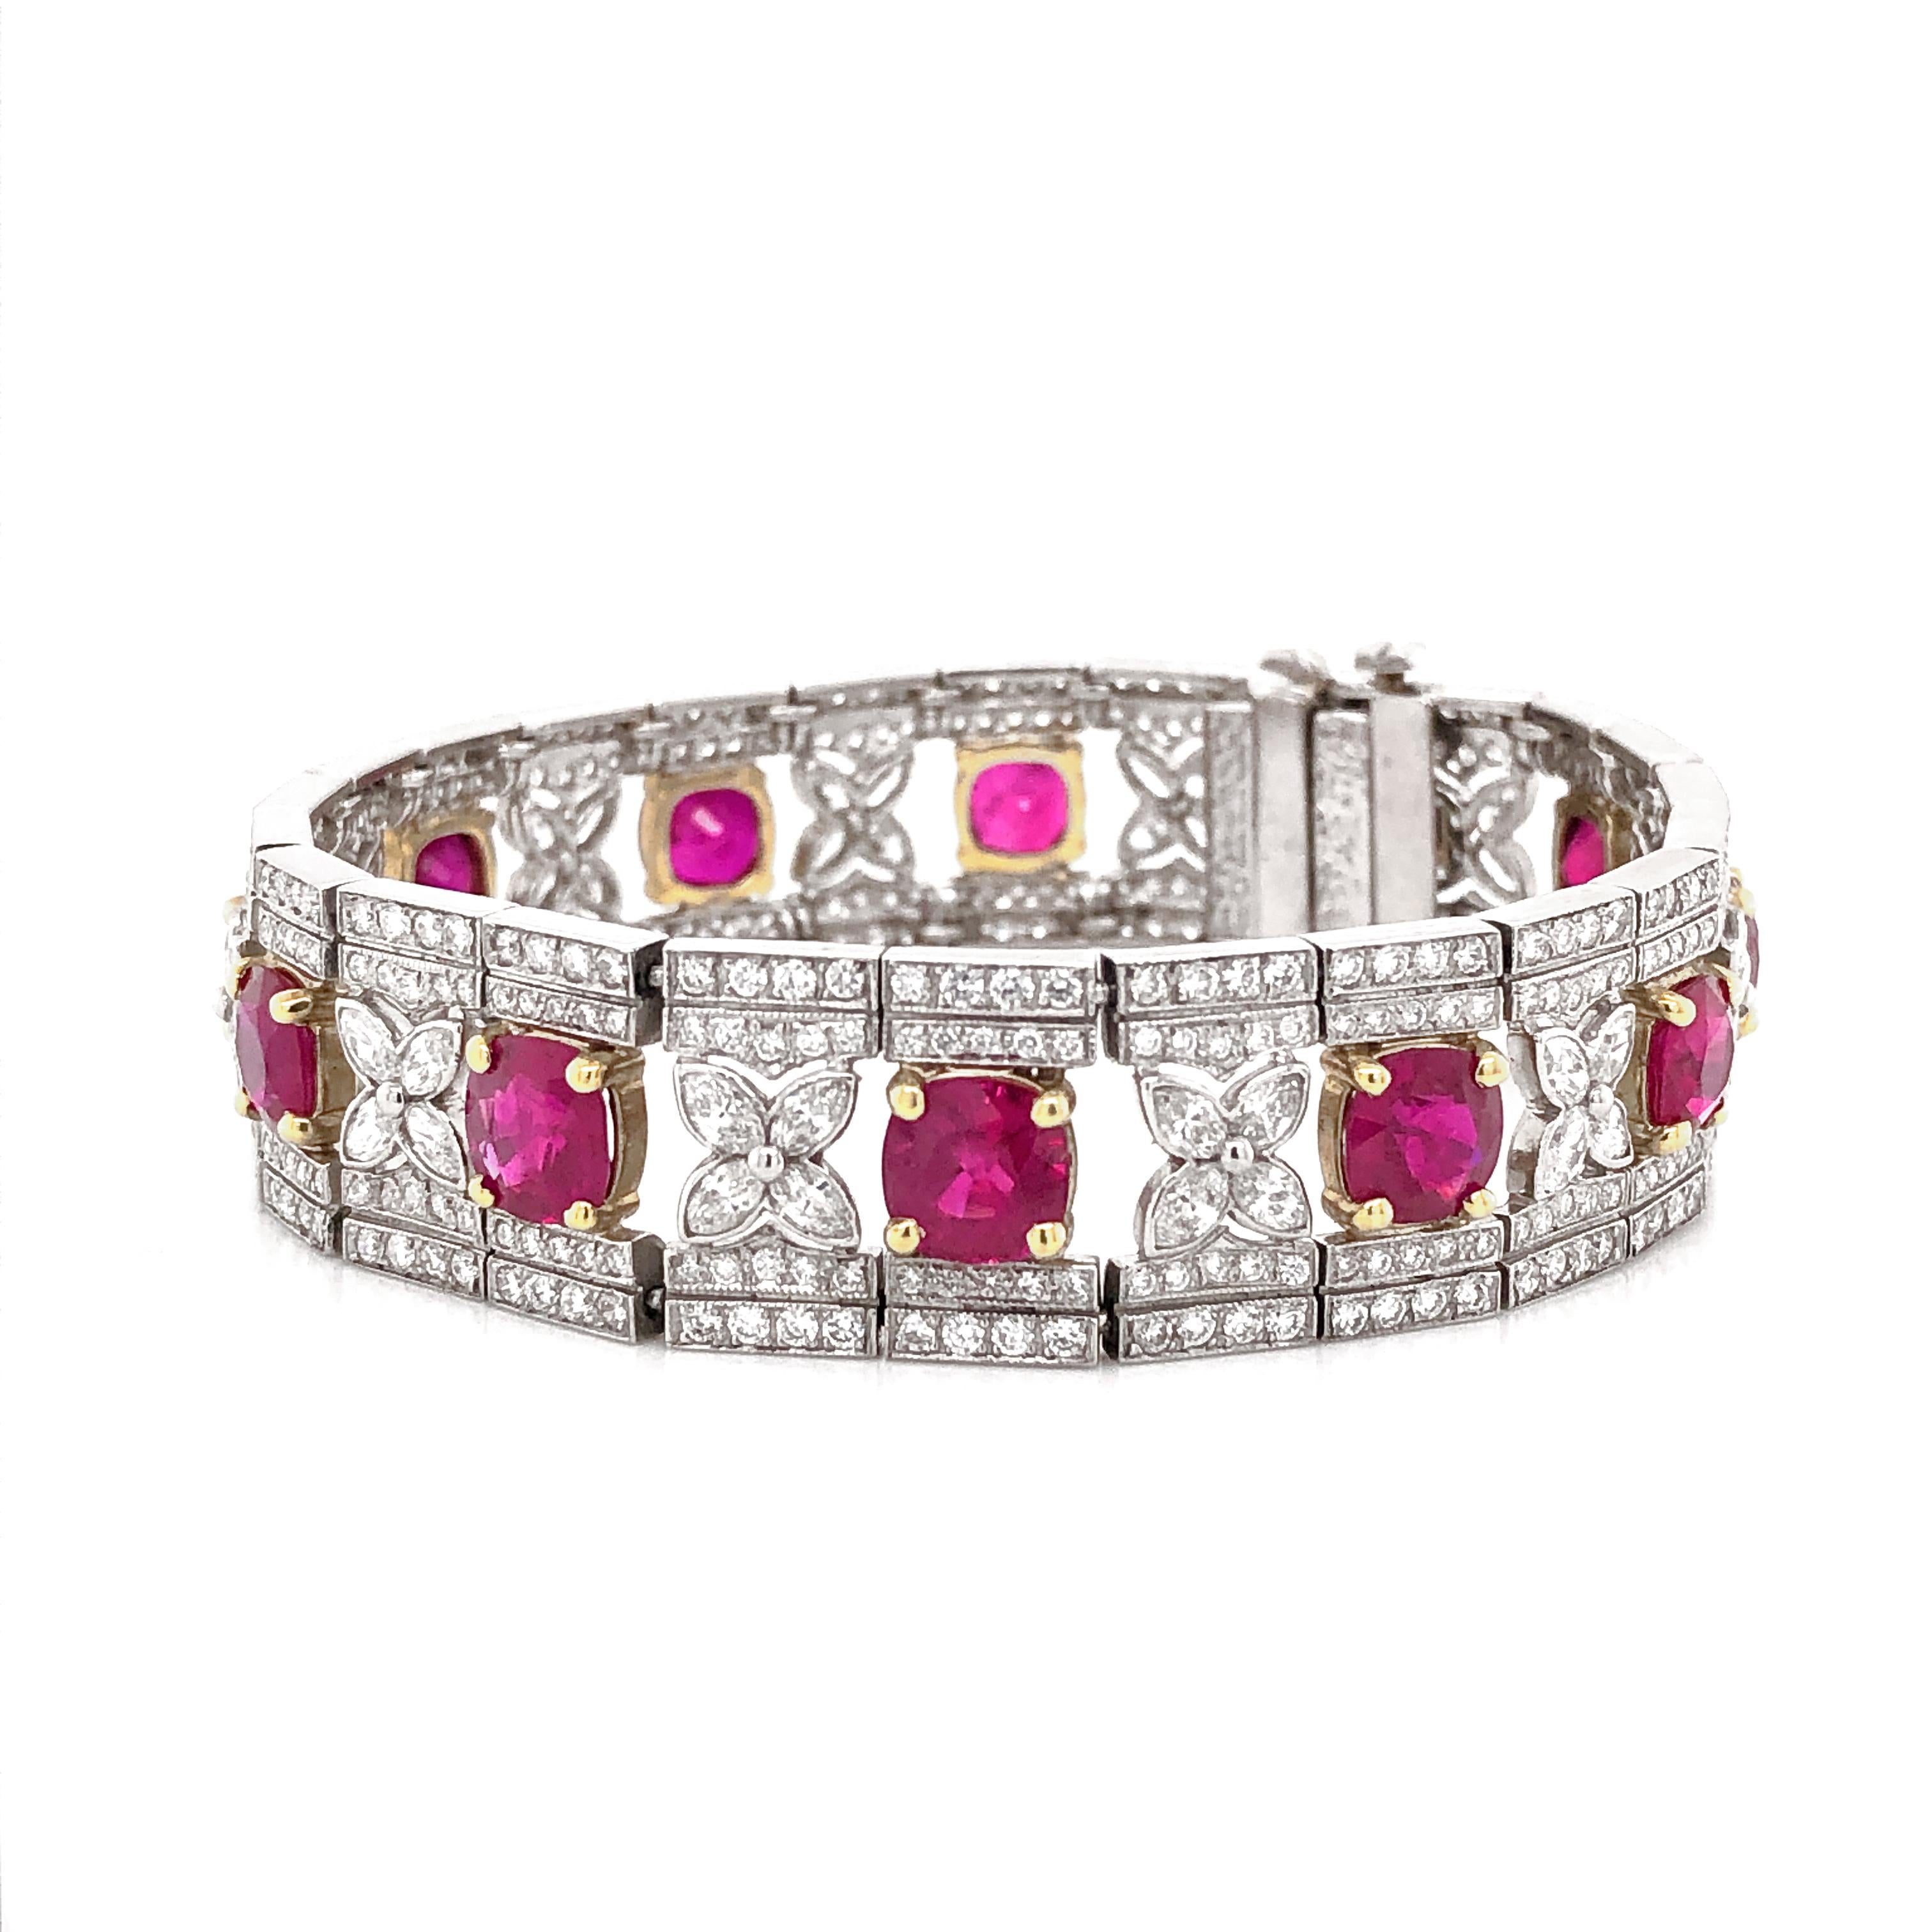 Art Deco Inspired Burmese Cushion Cut Rubies 14.11 Carat Platinum Link Bracelet In New Condition For Sale In New York, NY